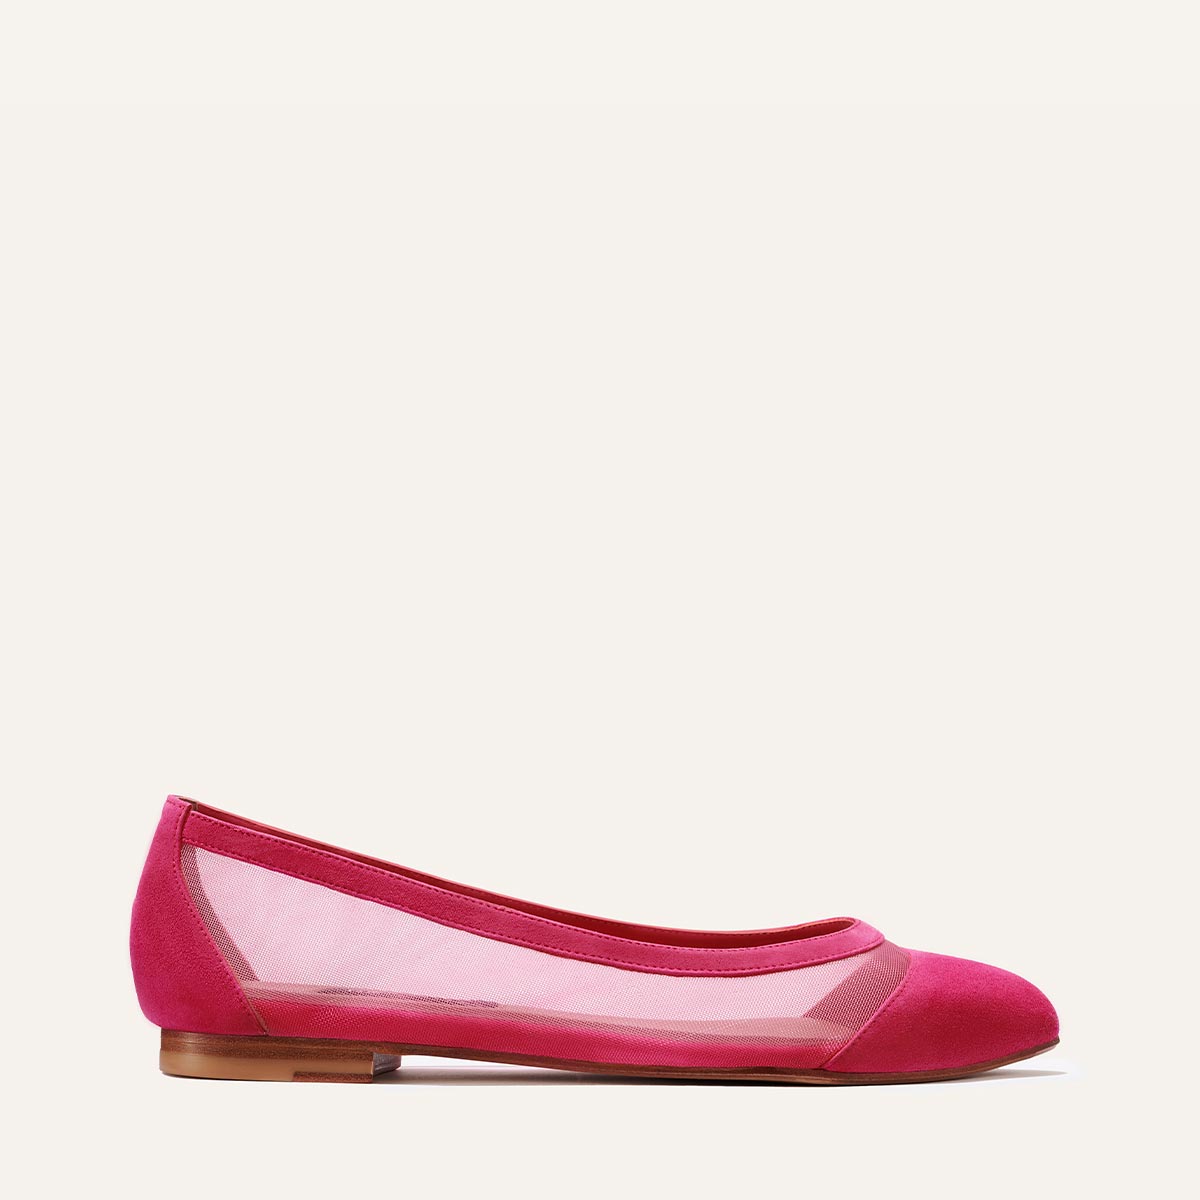 Margaux's classic and comfortable Pointe ballet flat in pink suede and mesh with an elegant pointed toe